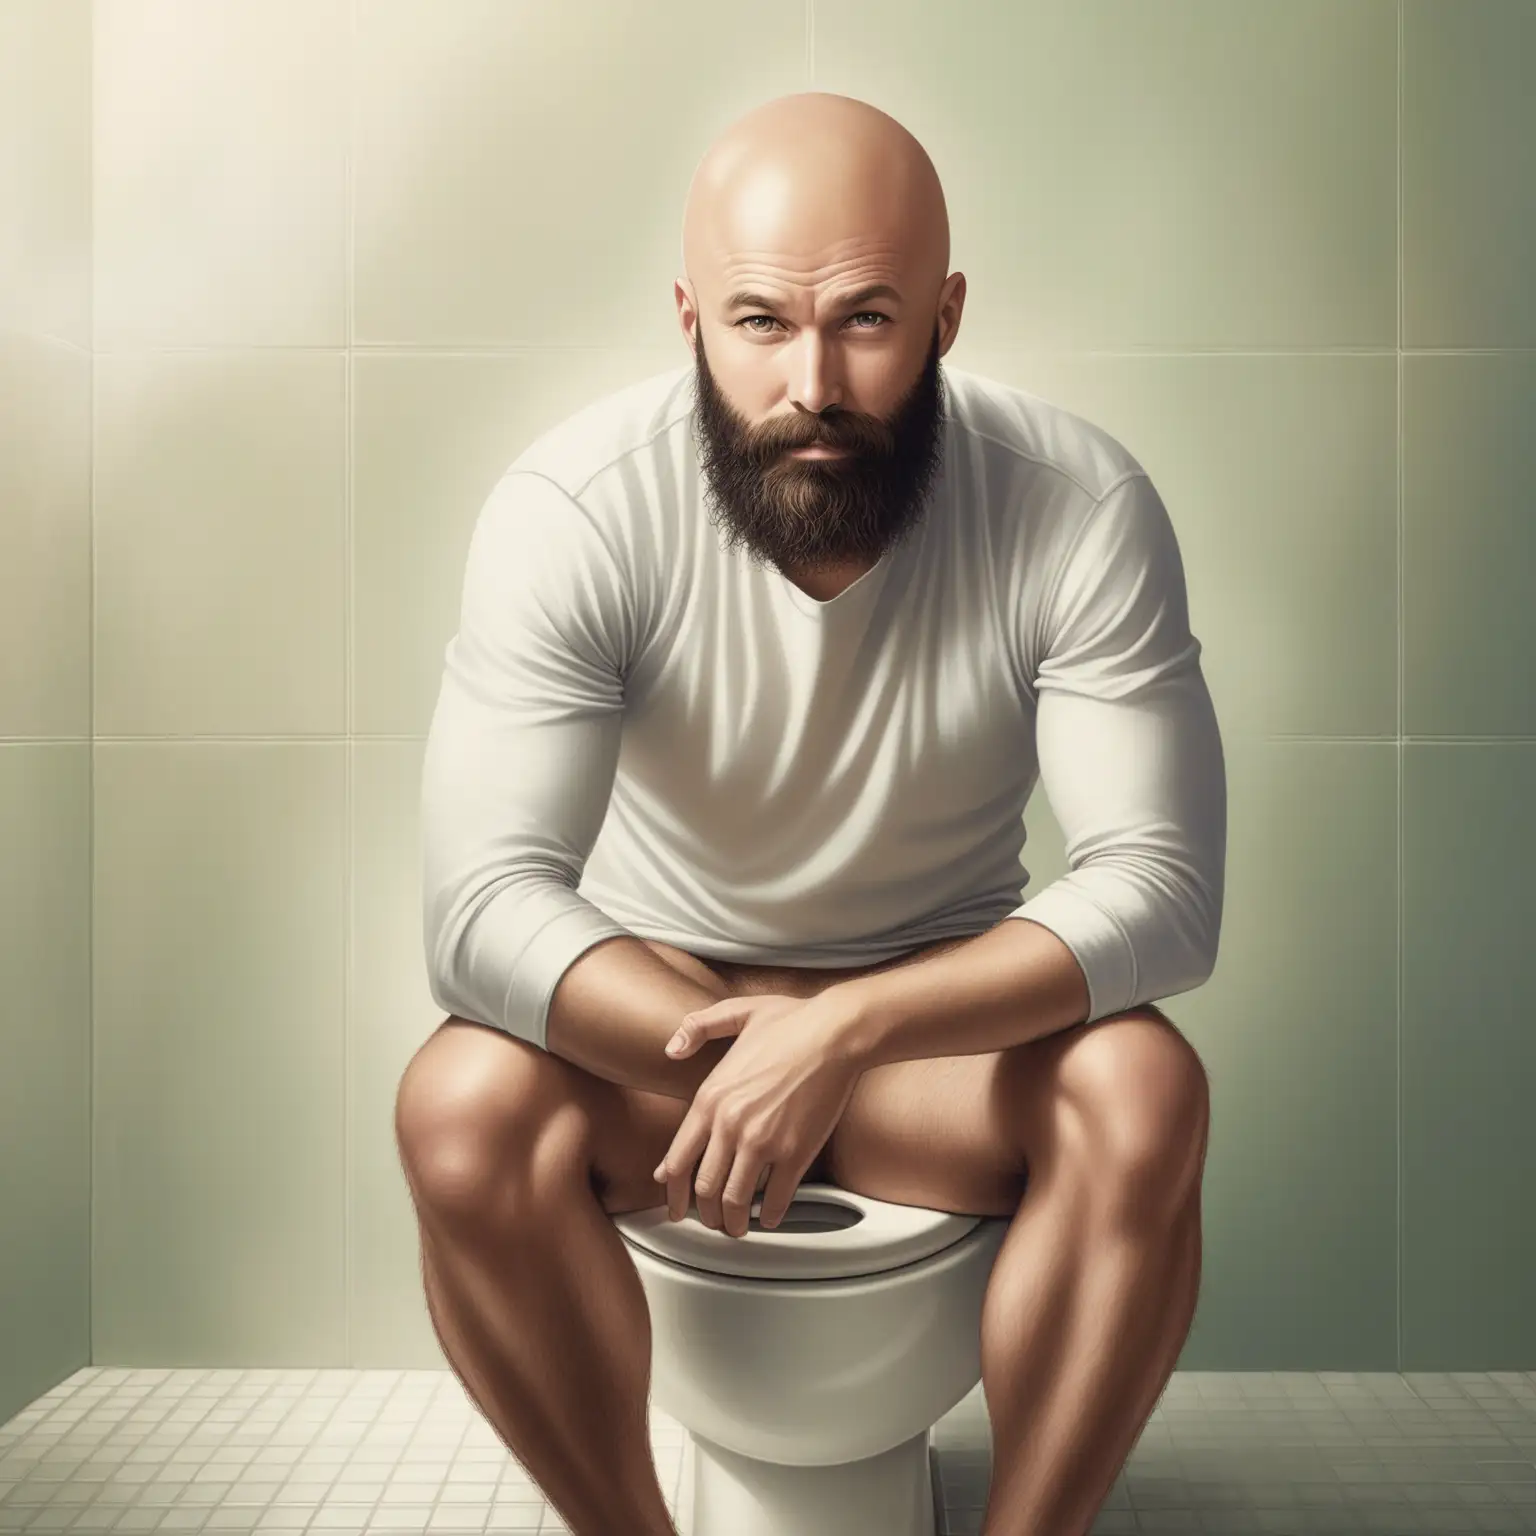 Bald man with a beard sitting on the toilet, pants down, album cover